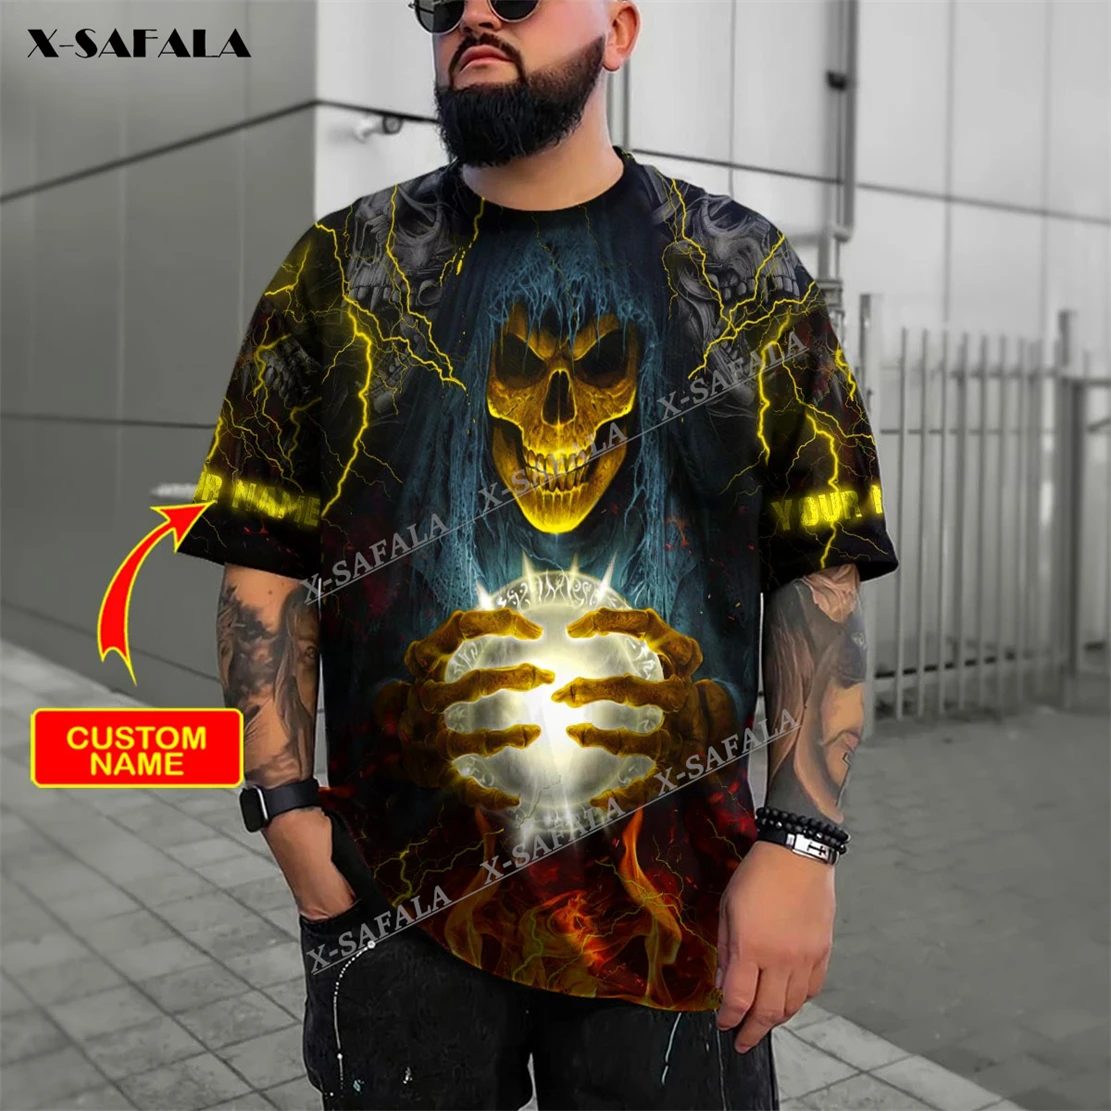 

X-SAFALA The Crystal Ball Grim Reaper Skull 3D Printed T-Shirts Tops Tees Short Sleeve Casual Milk Fibe Better Cotton O Collared